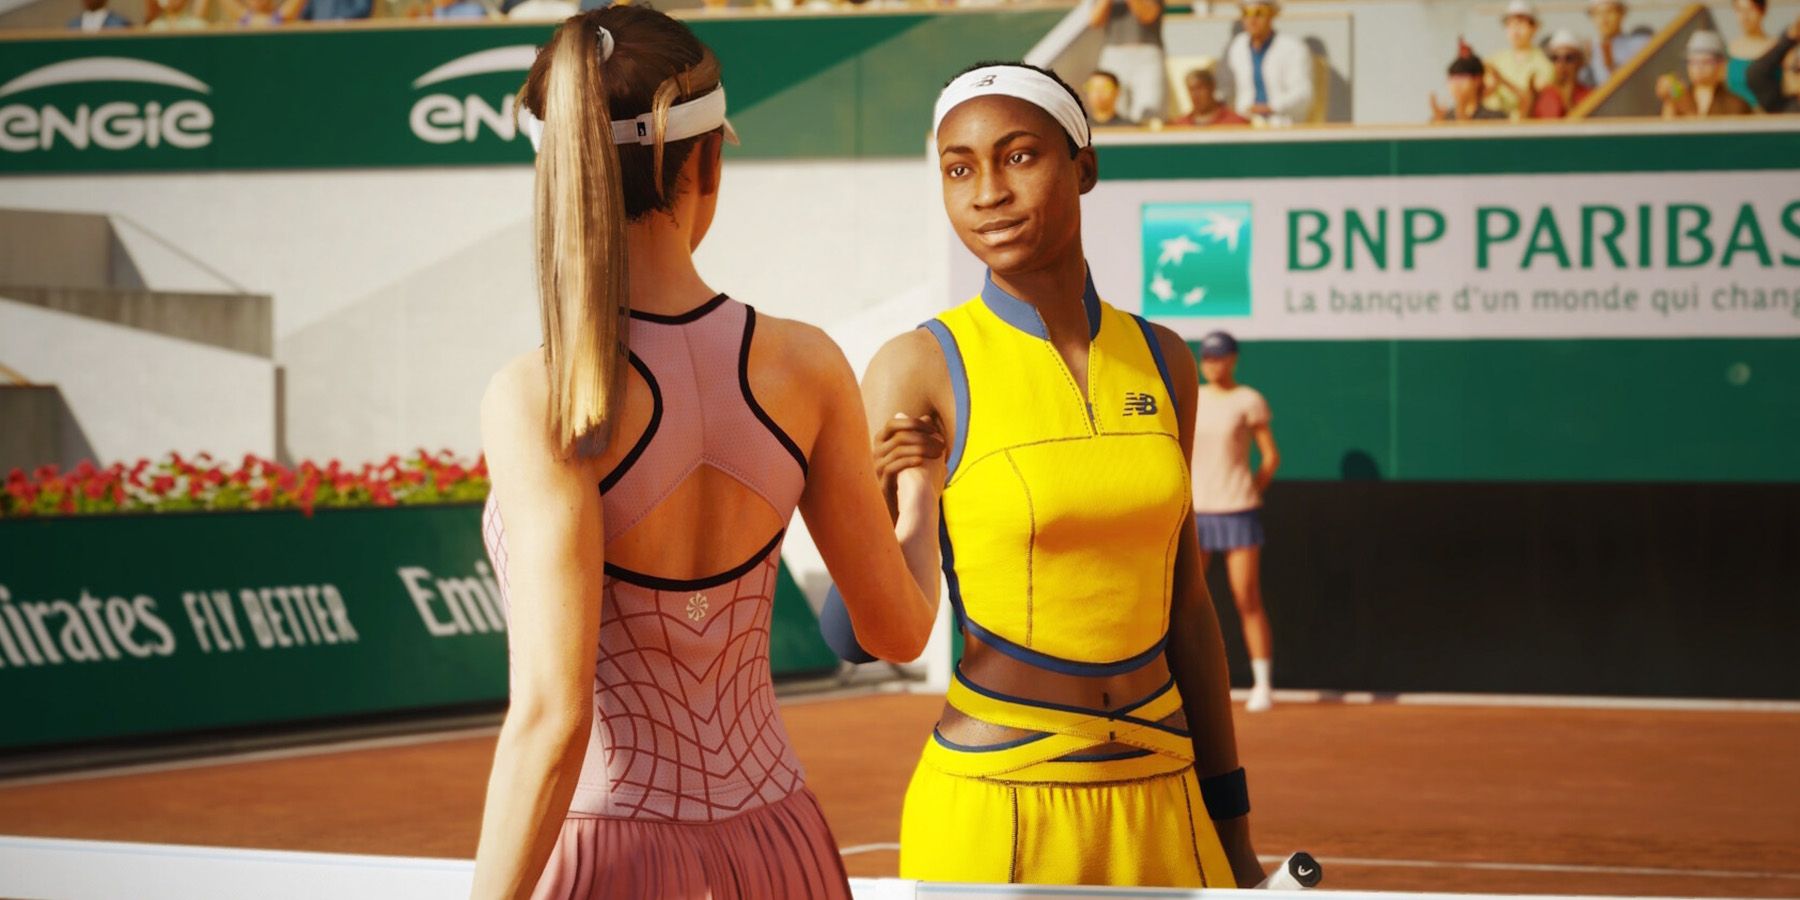 TopSpin 2K25 Coco Gauff yellow New Balance NB kit net handshake with blonde player at clay court